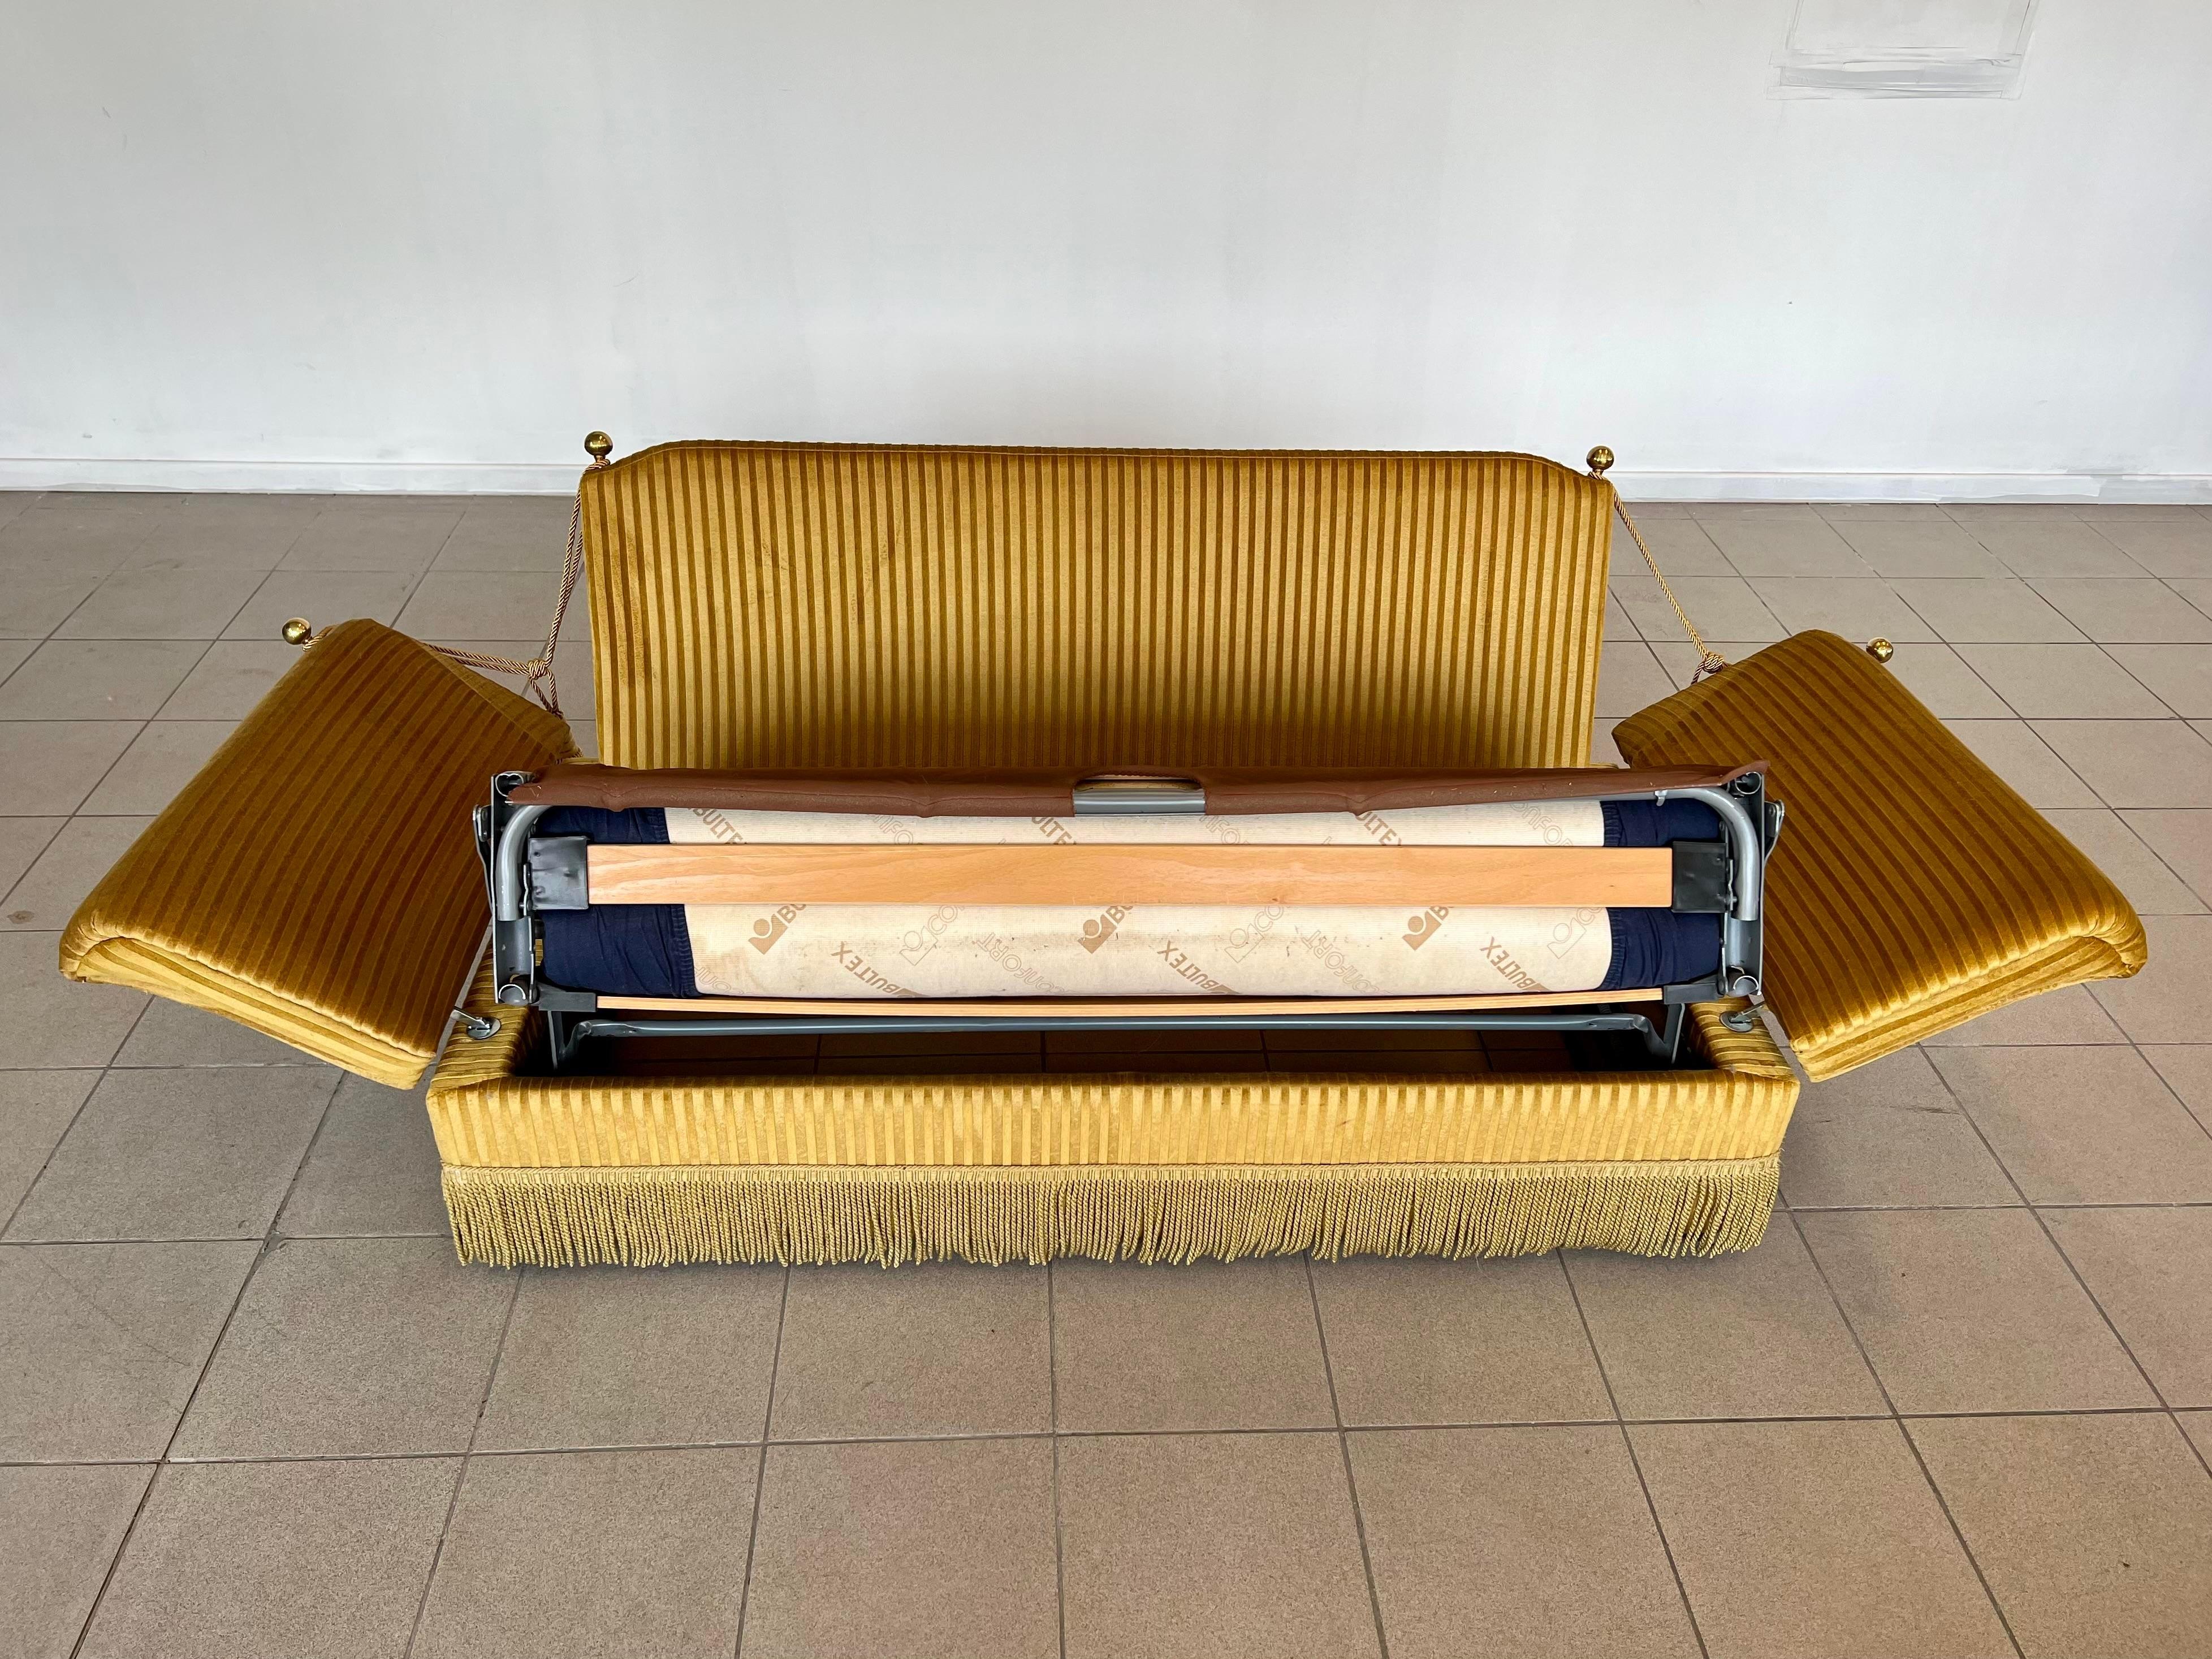 Vintage Art Deco Styled Adjustable Sofa Bed With Cushions and Fringes im Zustand „Gut“ im Angebot in Bridgeport, CT